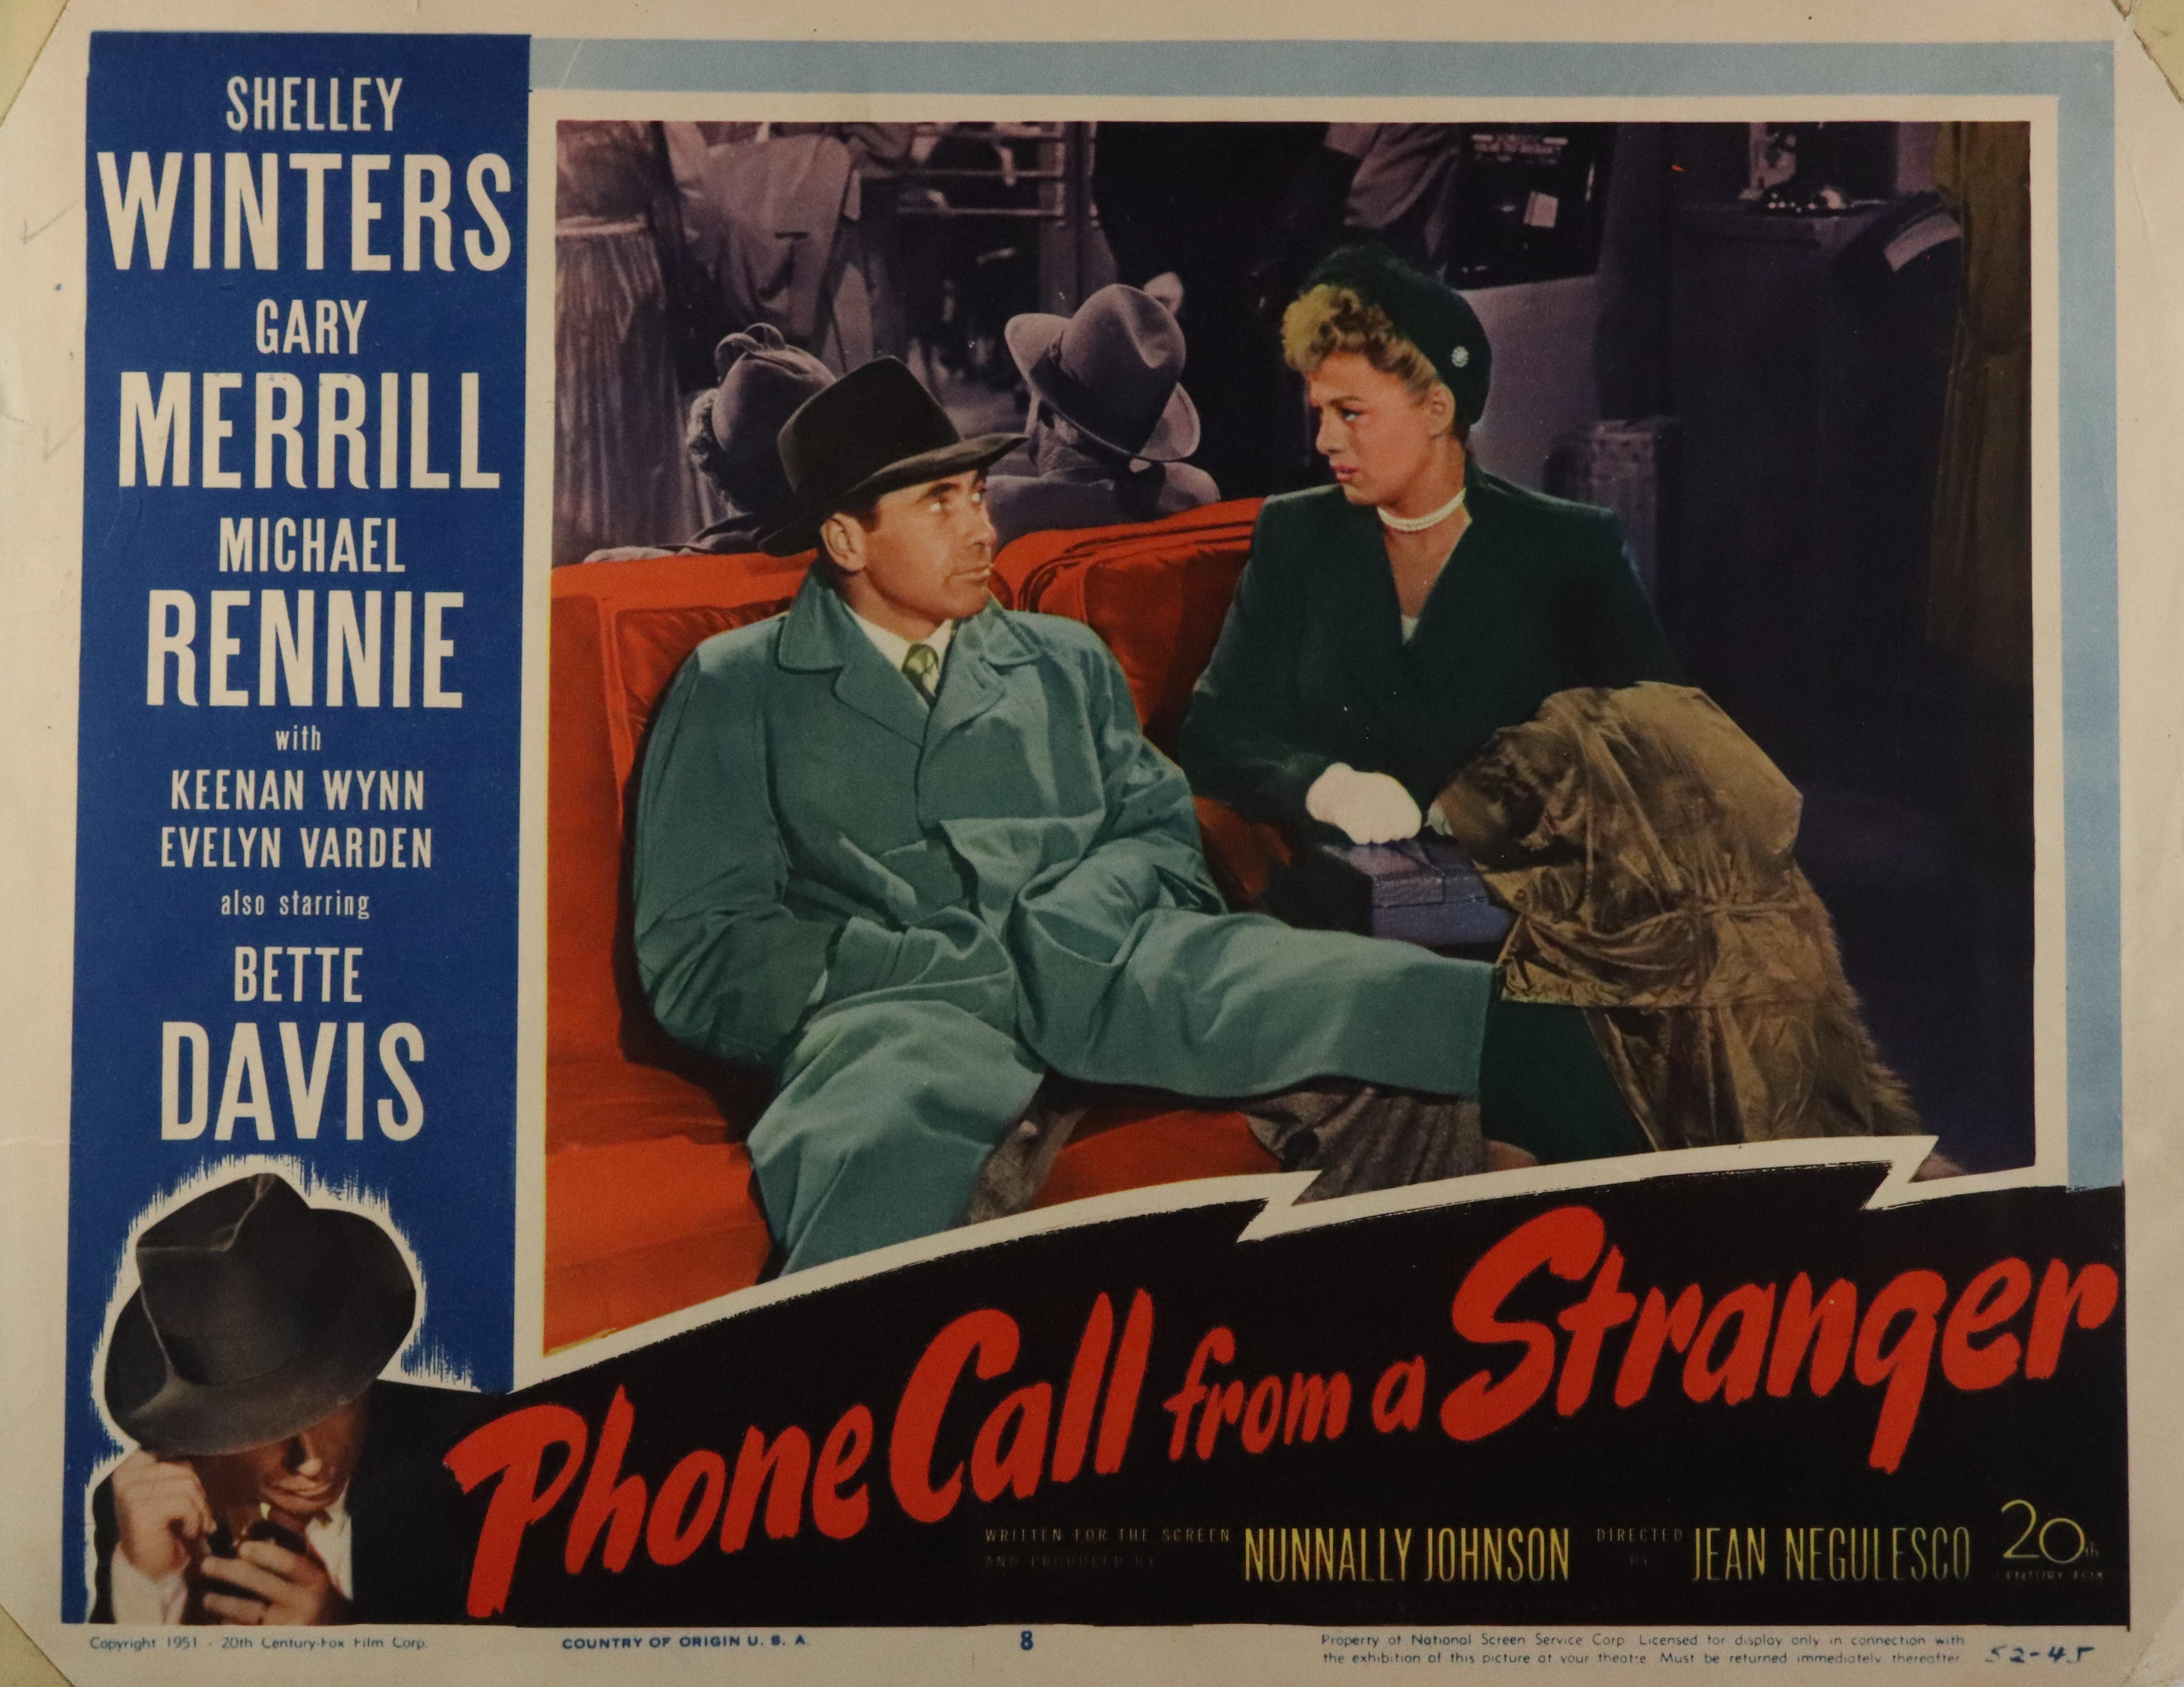 Unknown Interior Print - "Phone Call from a Stranger", Lobby Card, USA 1952